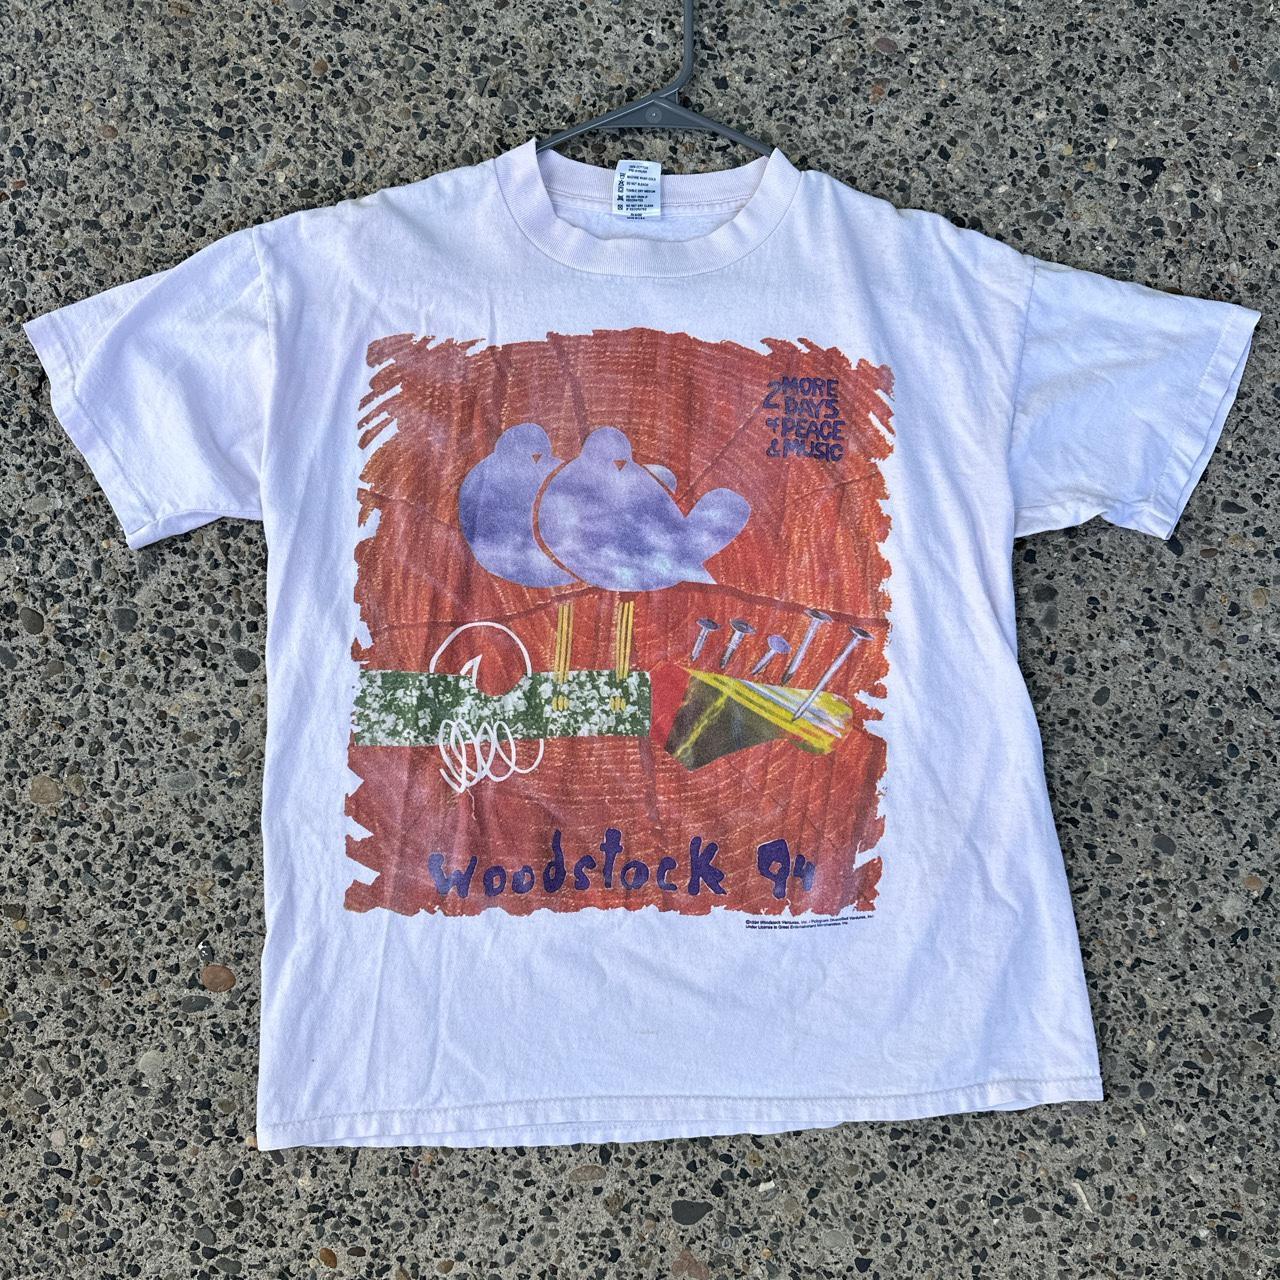 Woodstock 94’ T Shirt Size L dm with any... - Depop